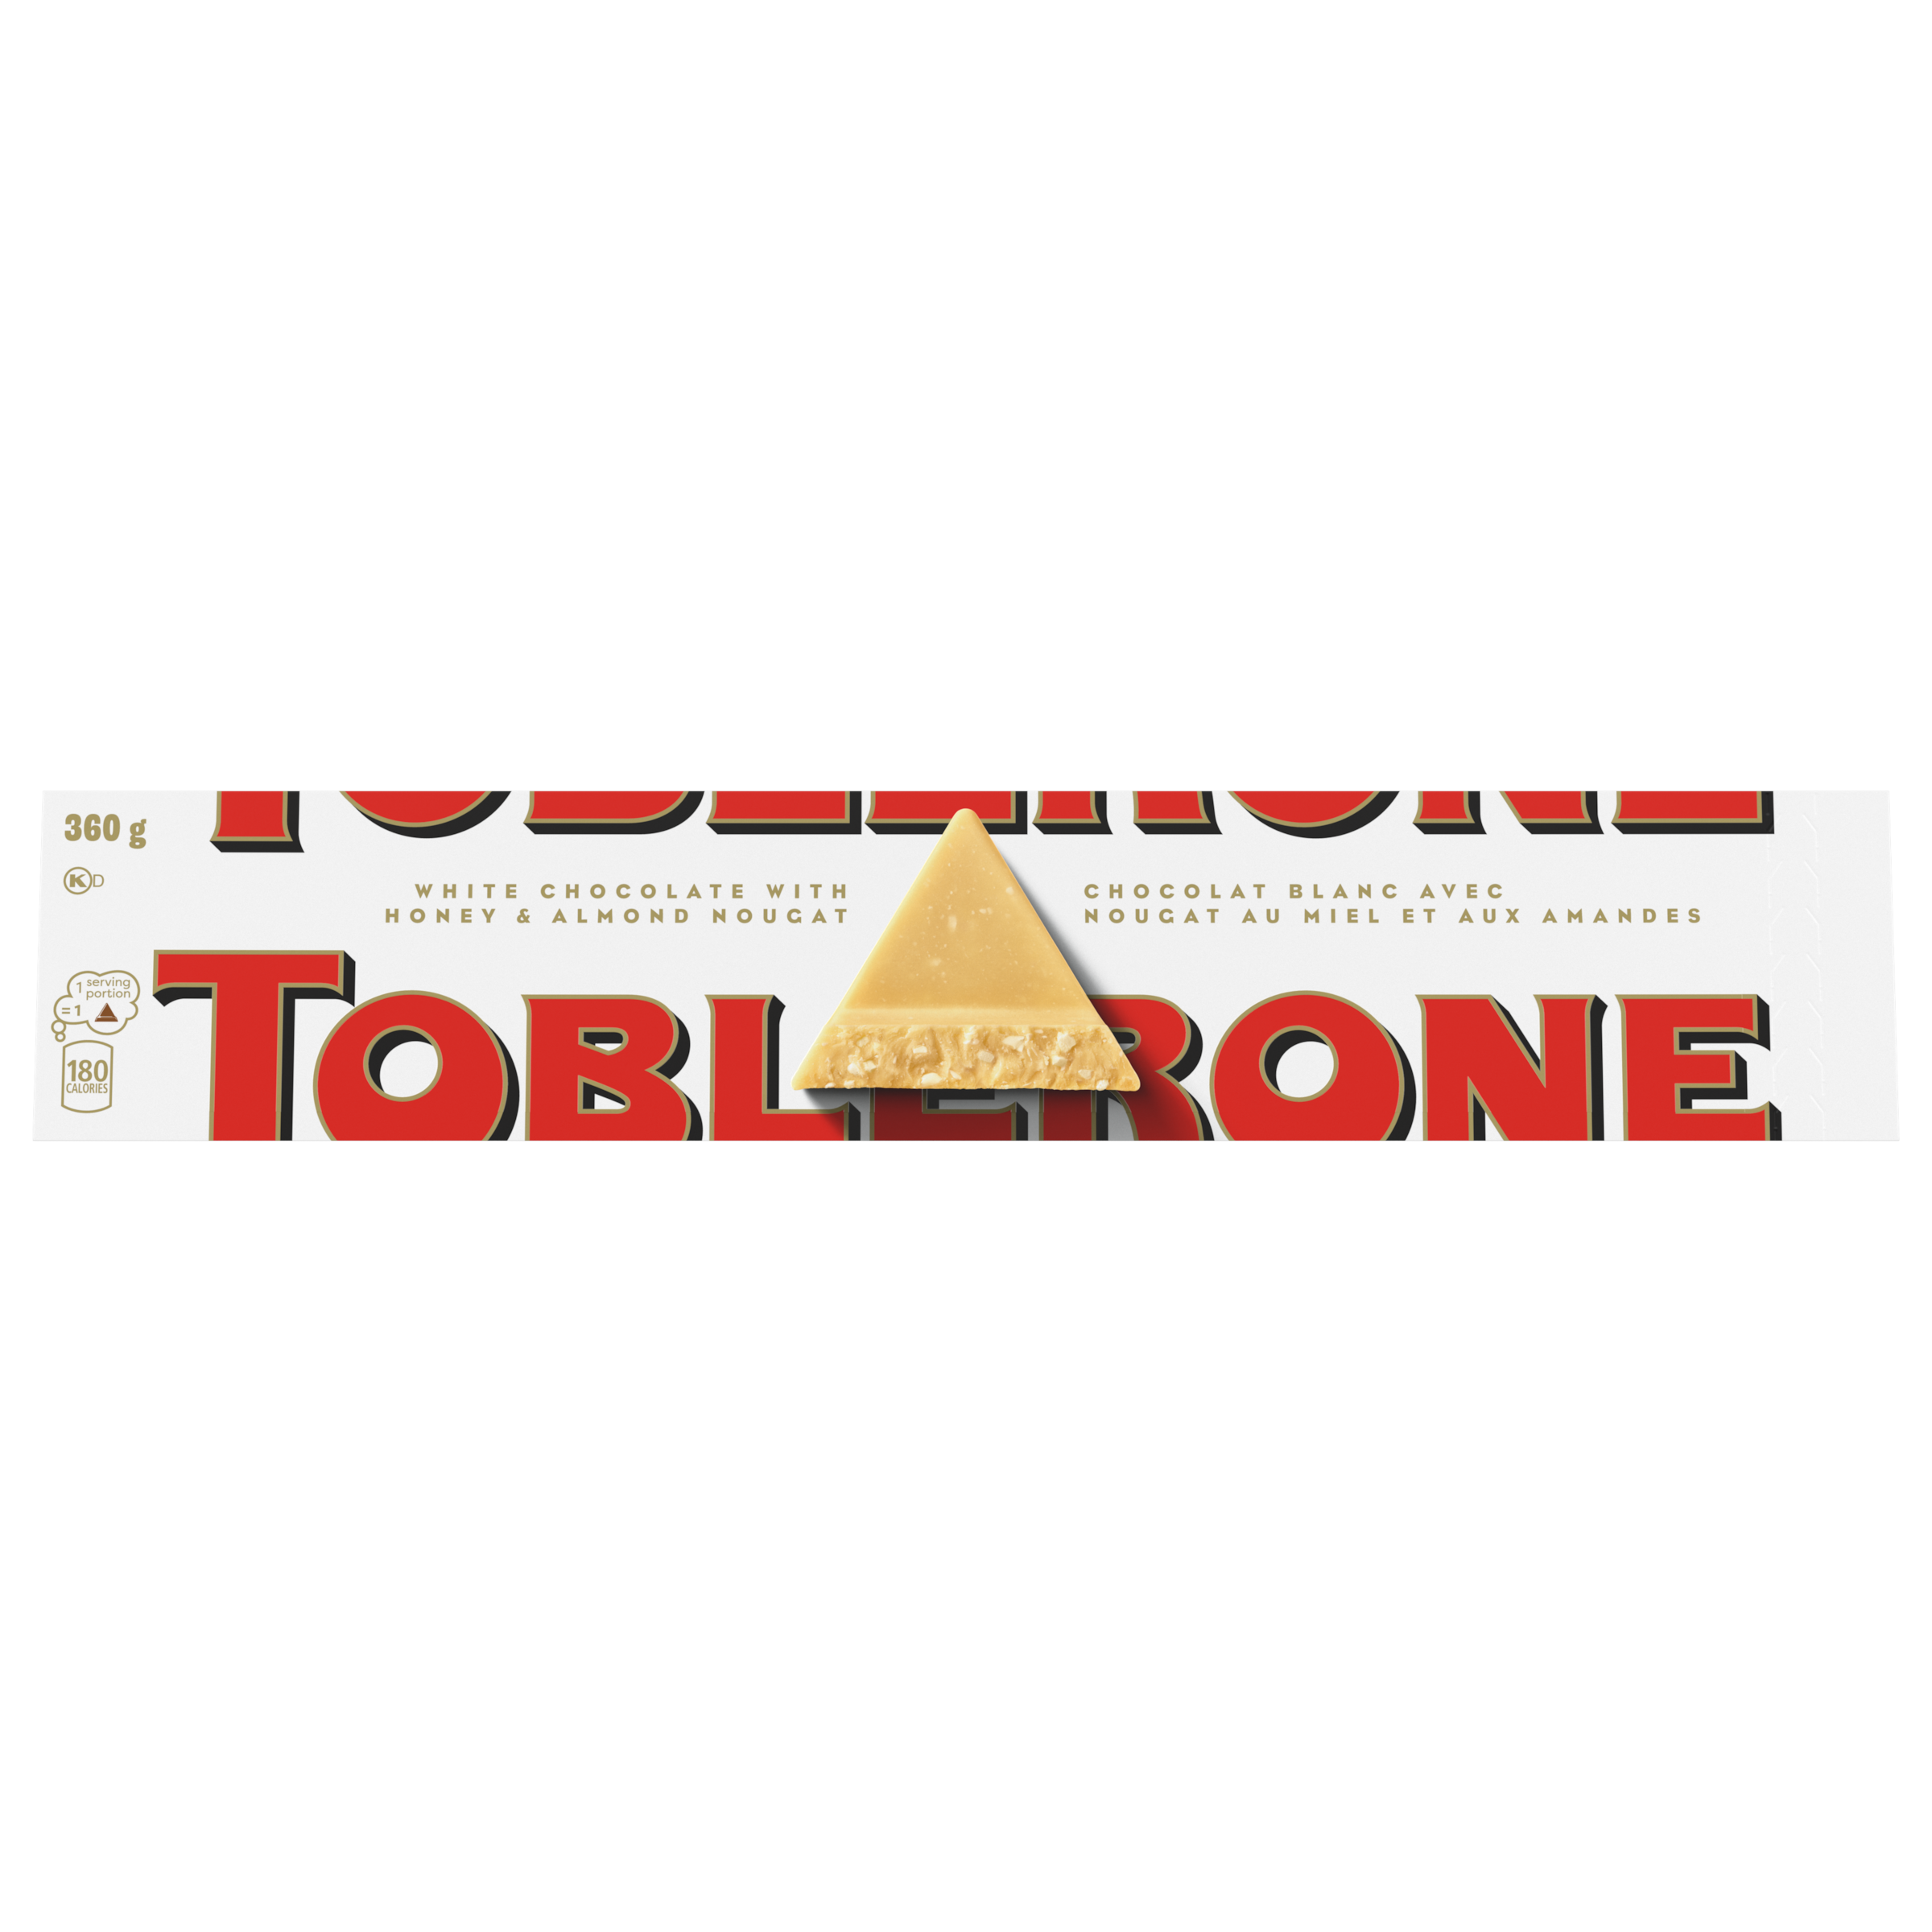 TOBLERONE White Chocolate with Honey and Almond Nougat Bar (360 g)